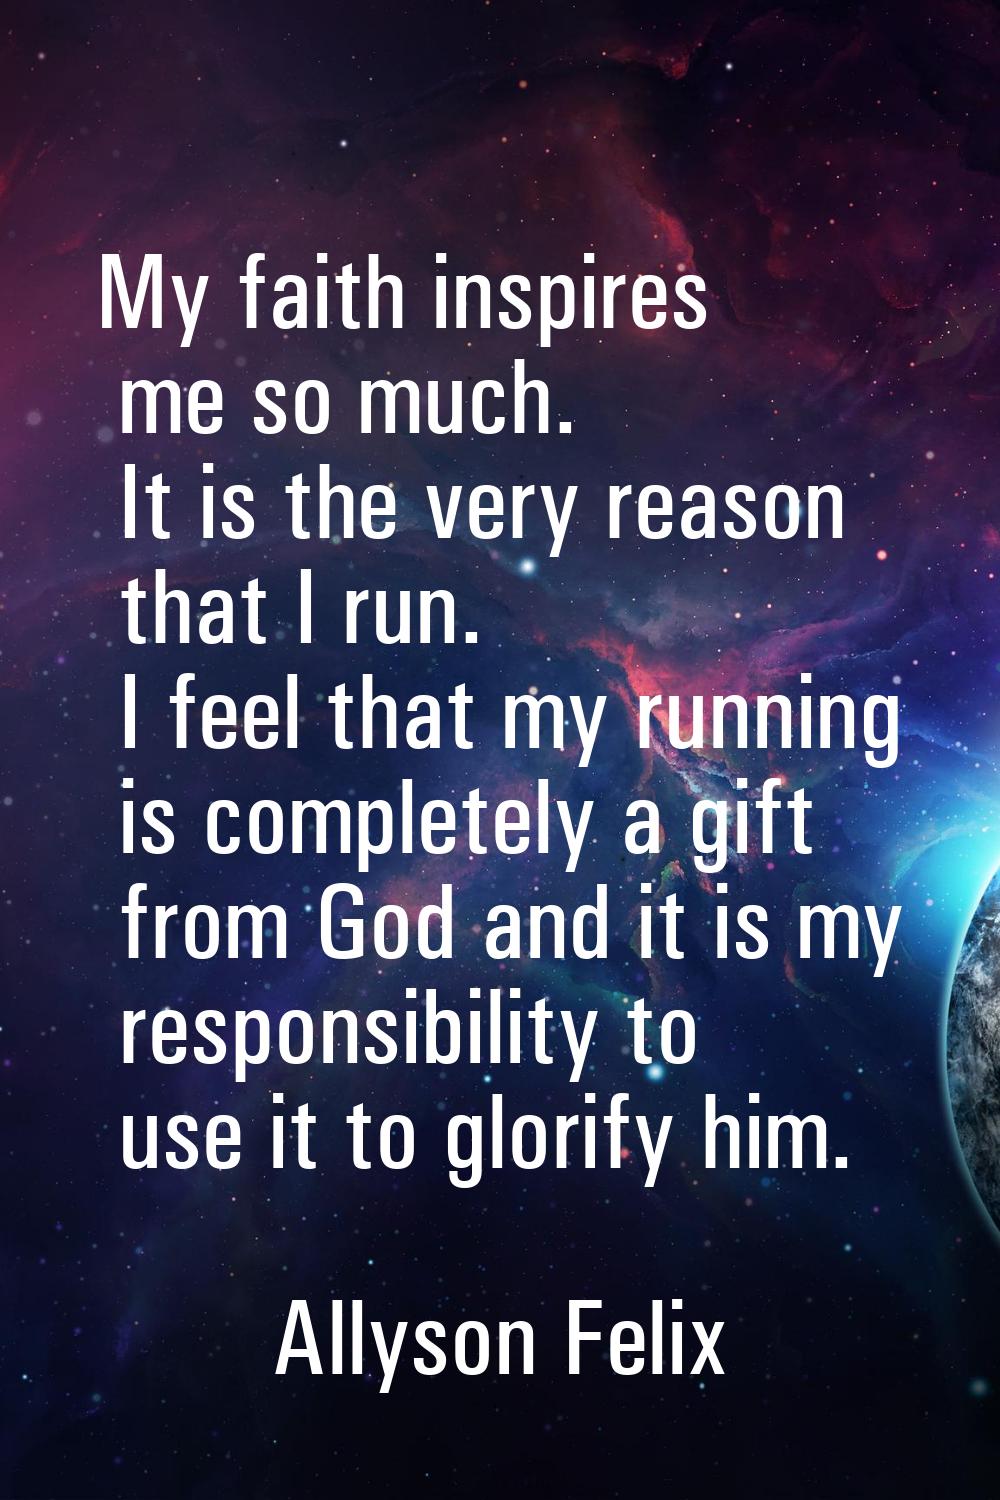 My faith inspires me so much. It is the very reason that I run. I feel that my running is completel